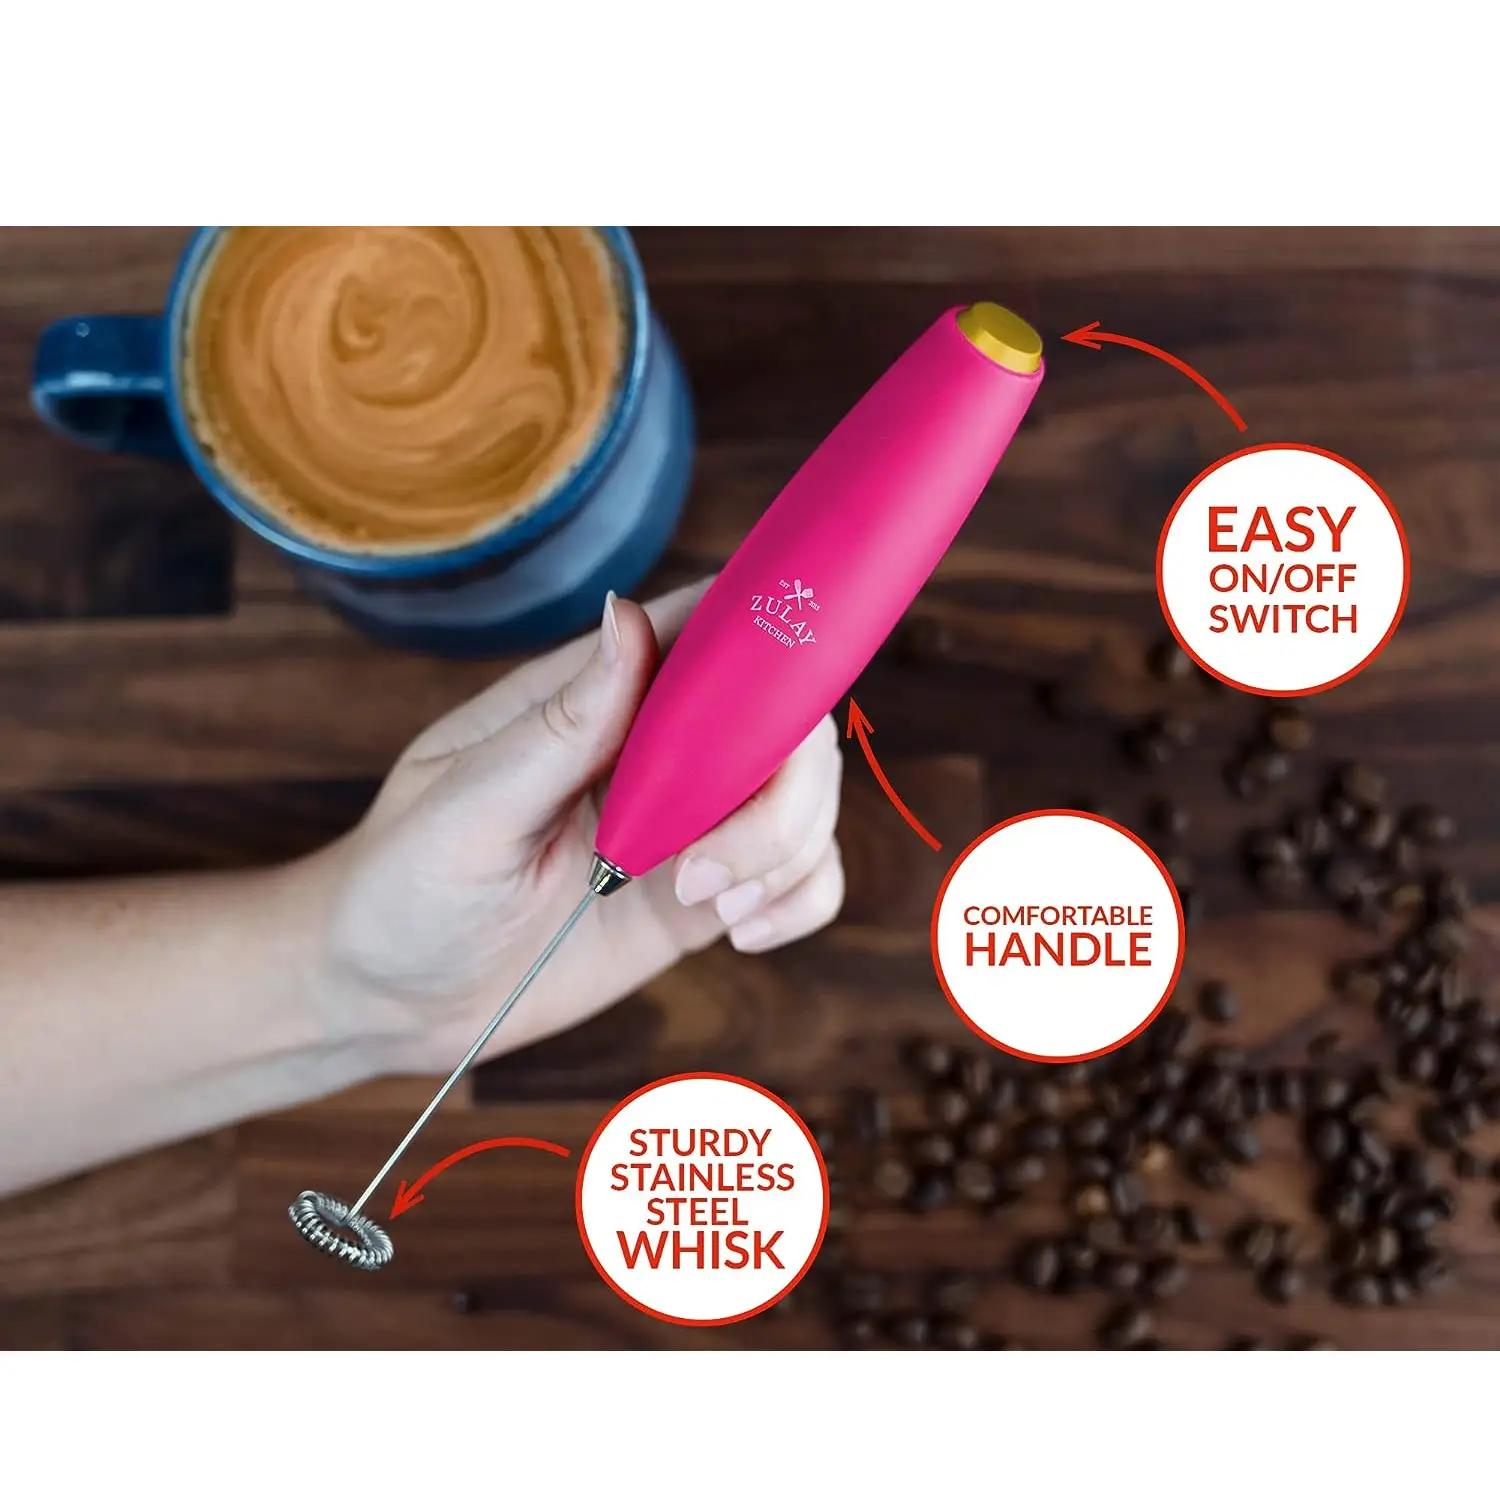 Milk Frother With Holster Stand -  Super Instant Electric Foam Maker With Stainless Steel